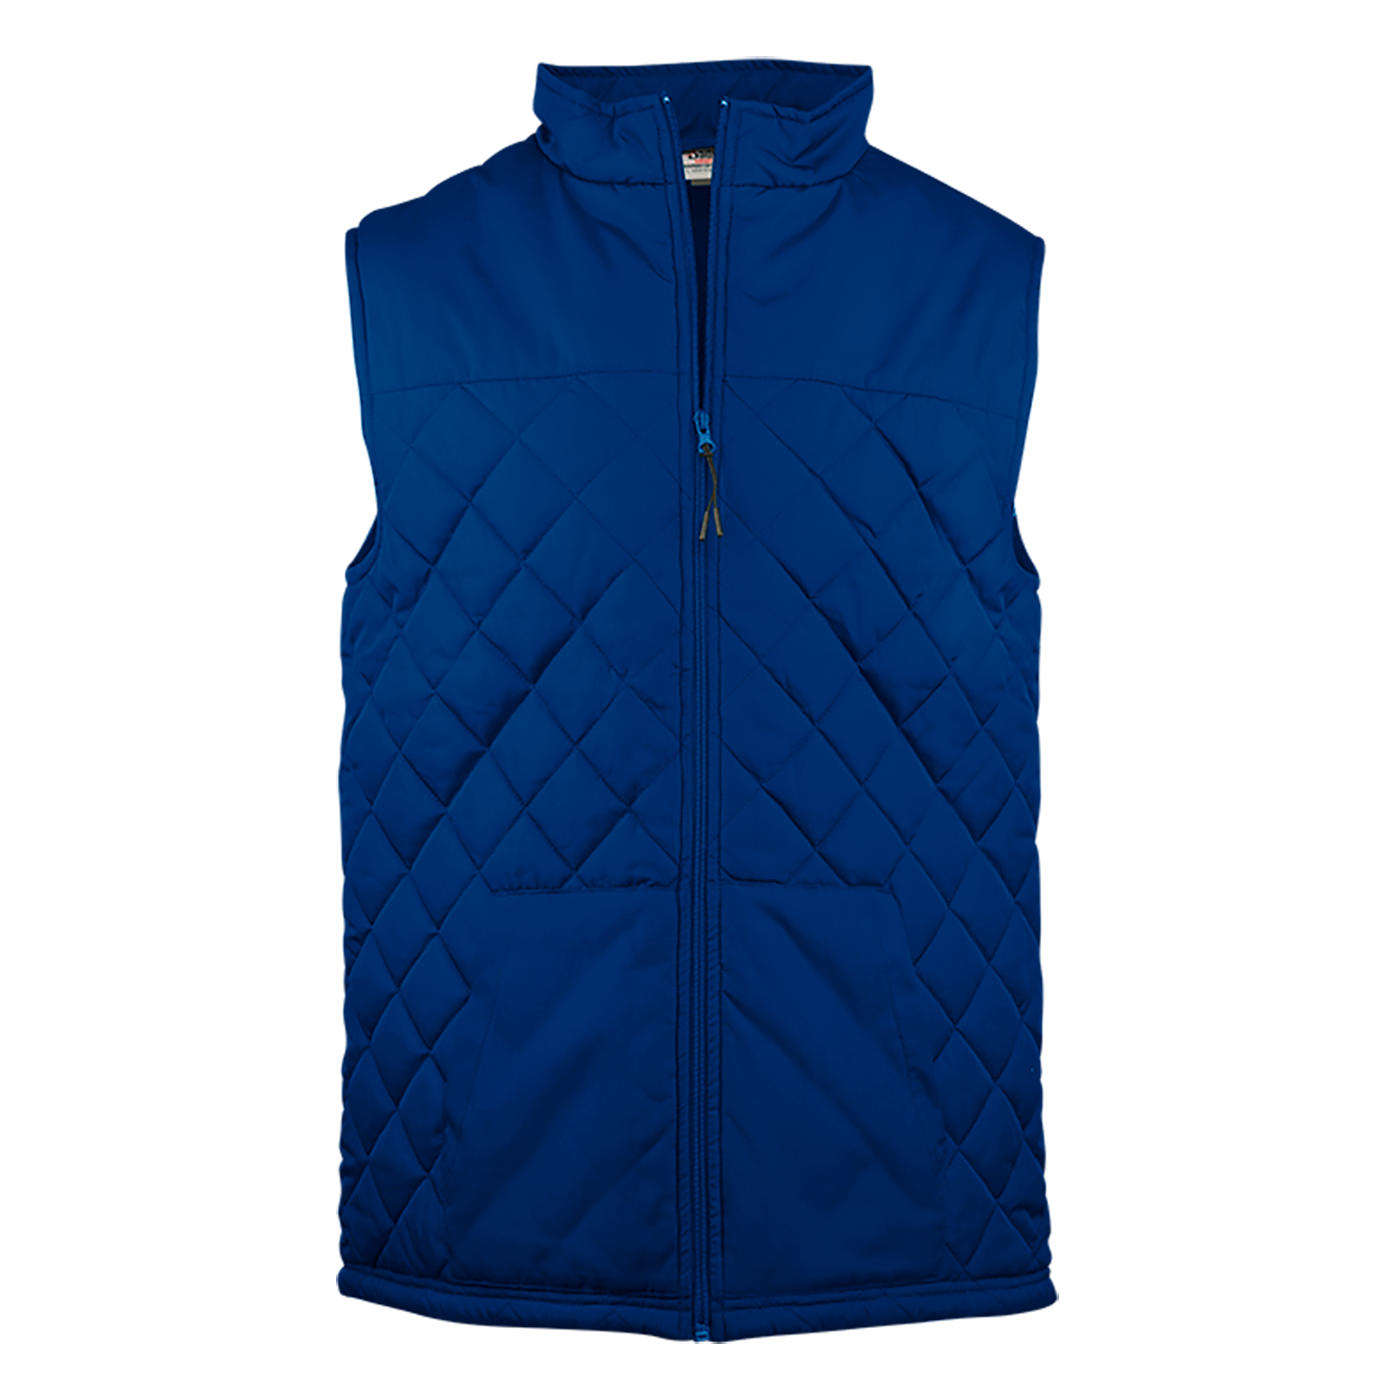 Quilted Women's Vest | Founder Sport Group (766600)